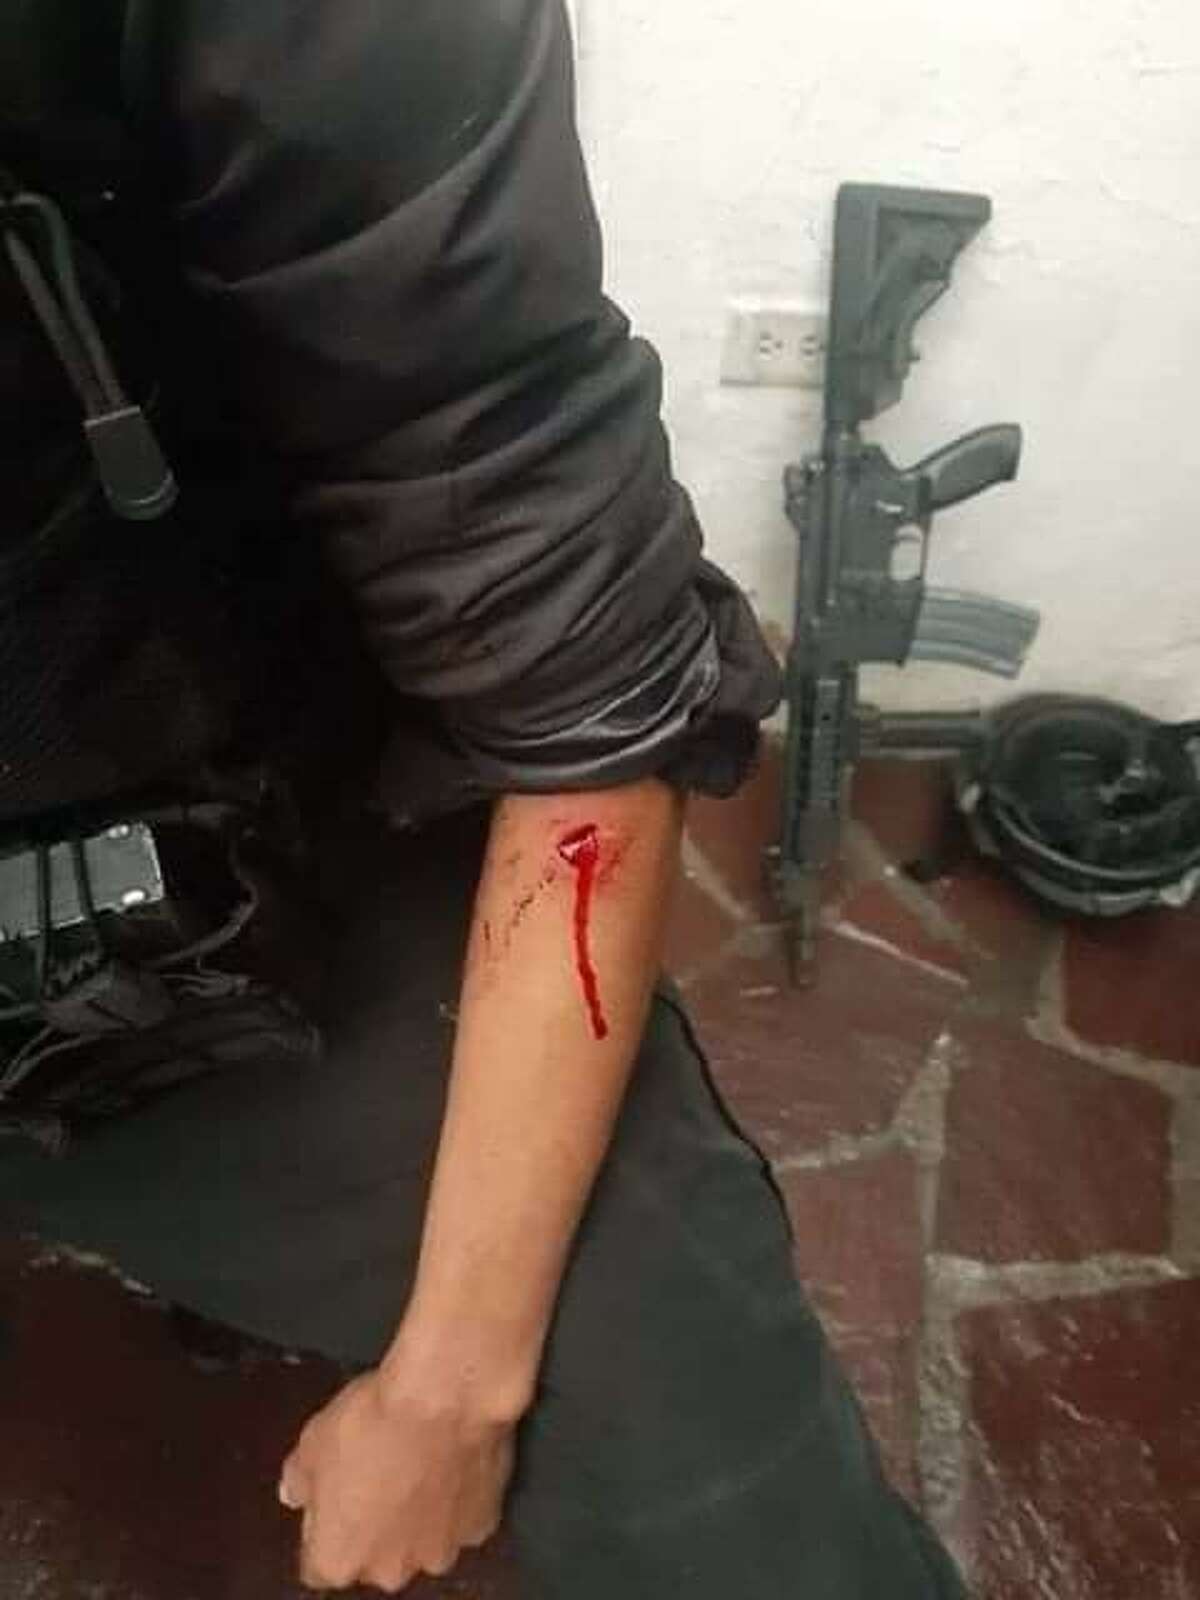 Some state cops were wounded in the firefights that occurred Tuesday and Wednesday with suspected cartel members in Nuevo Laredo.